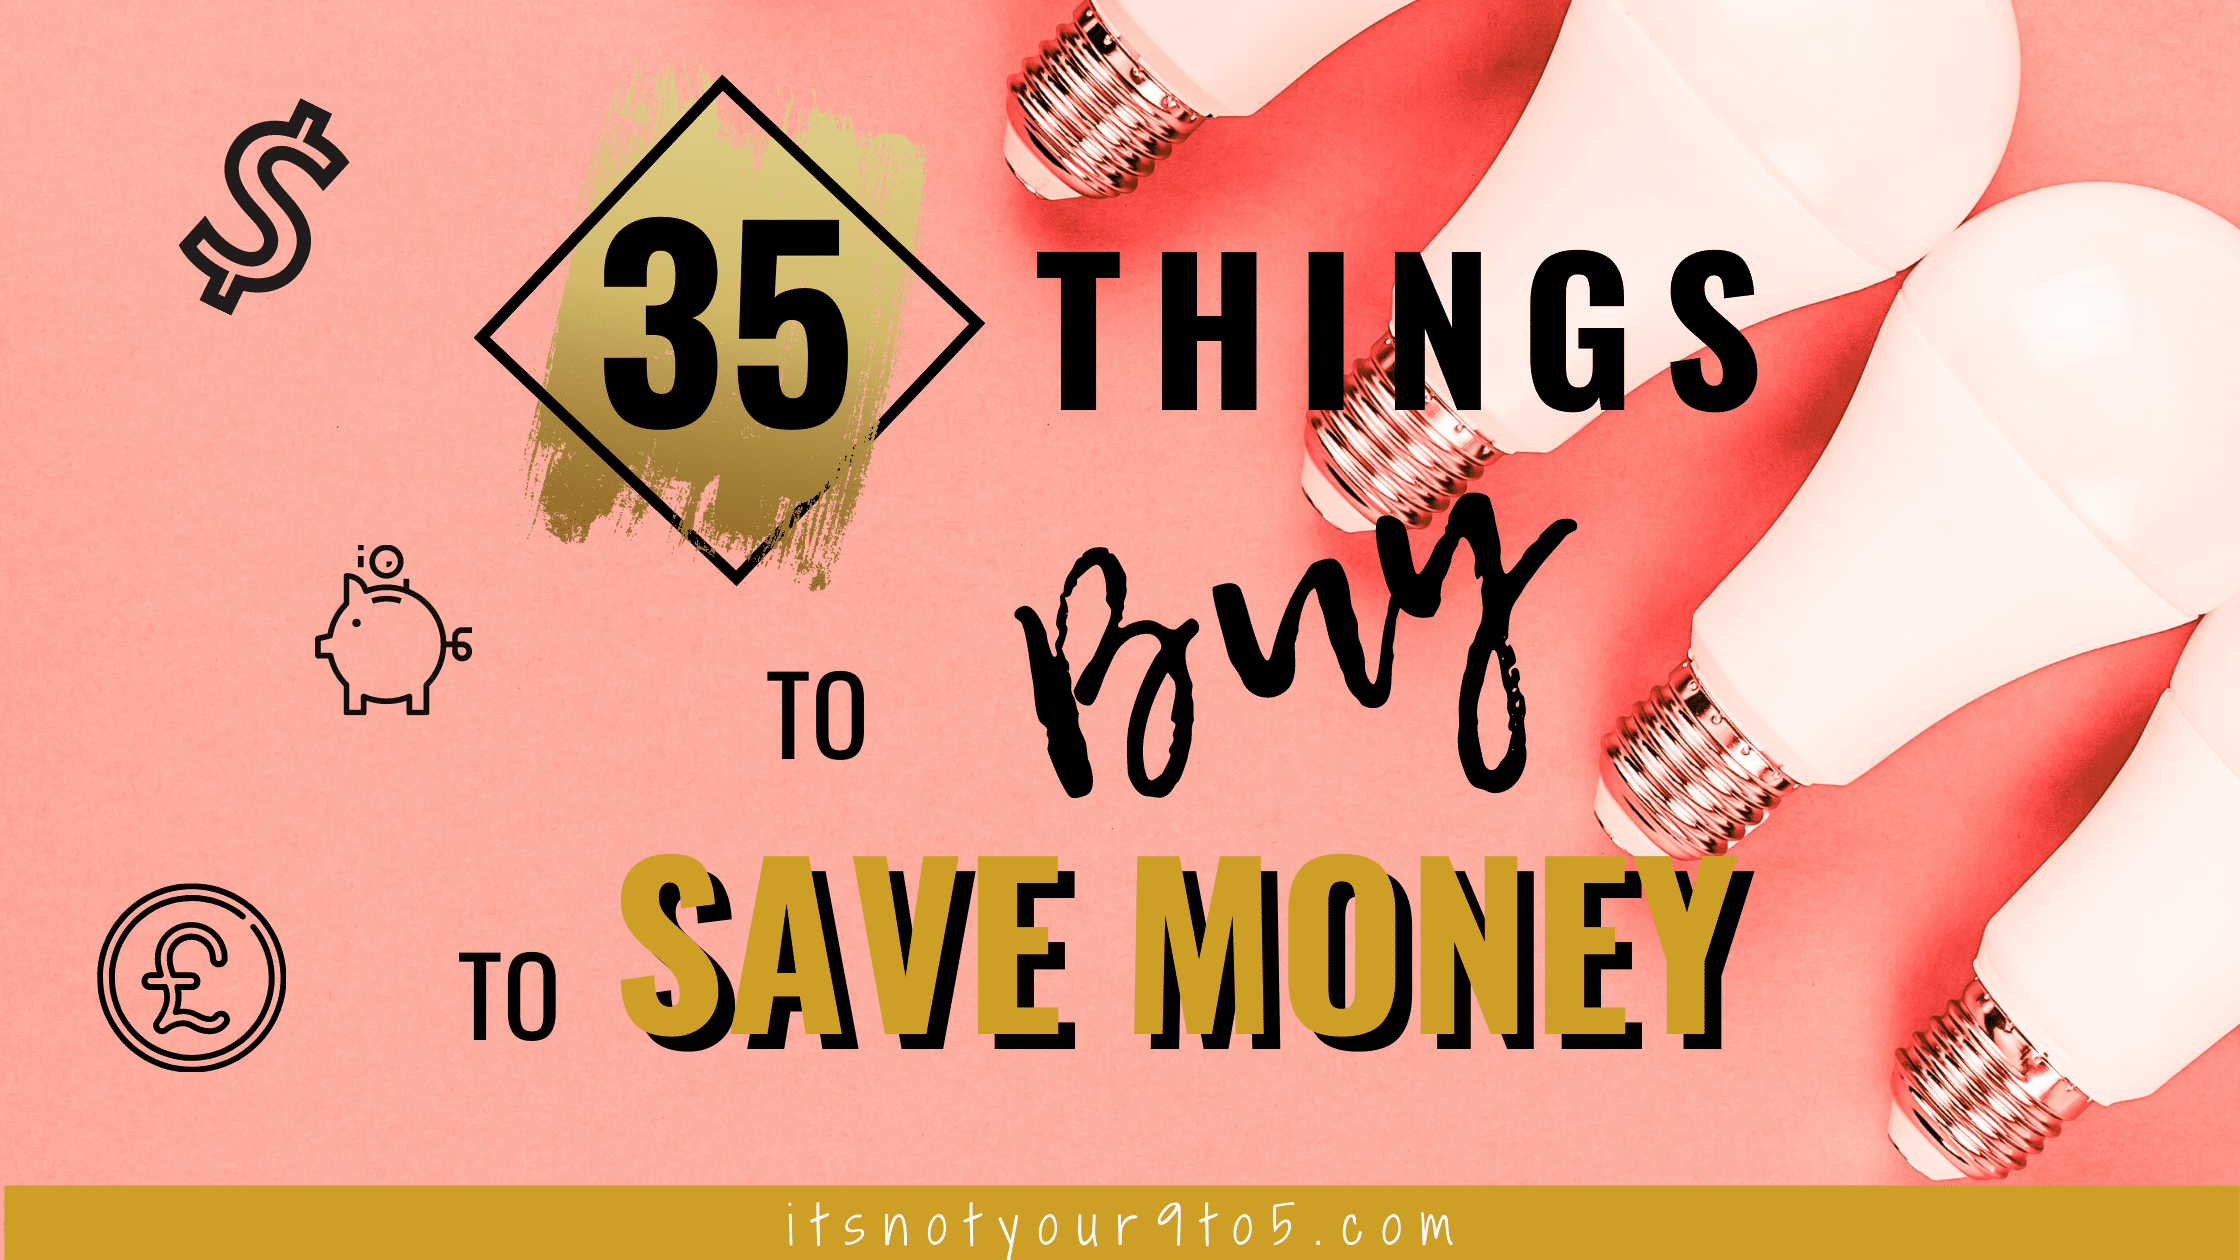 You are currently viewing 35 Things to Buy to Save Money